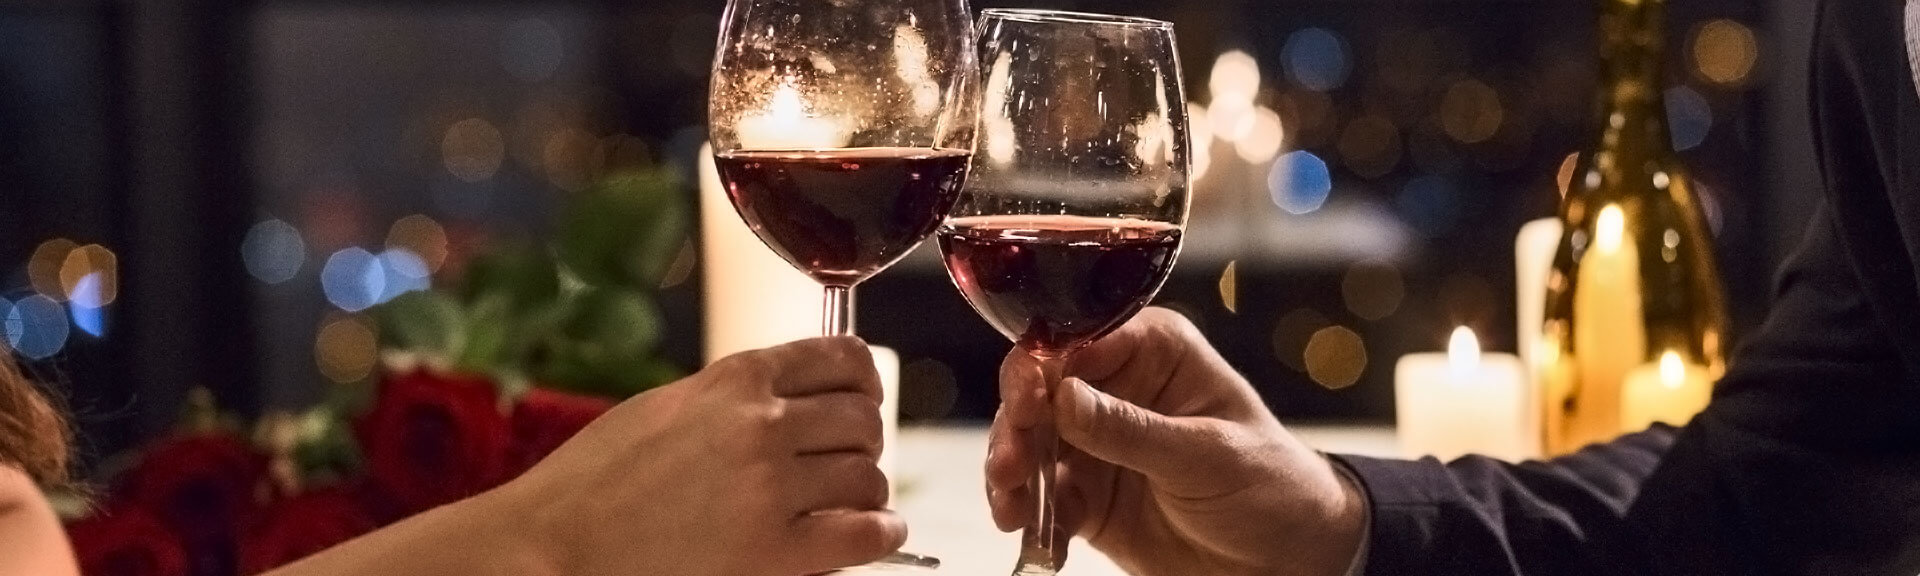 2 people at a candlelight dinner in a restaurant toast with red wine glasses